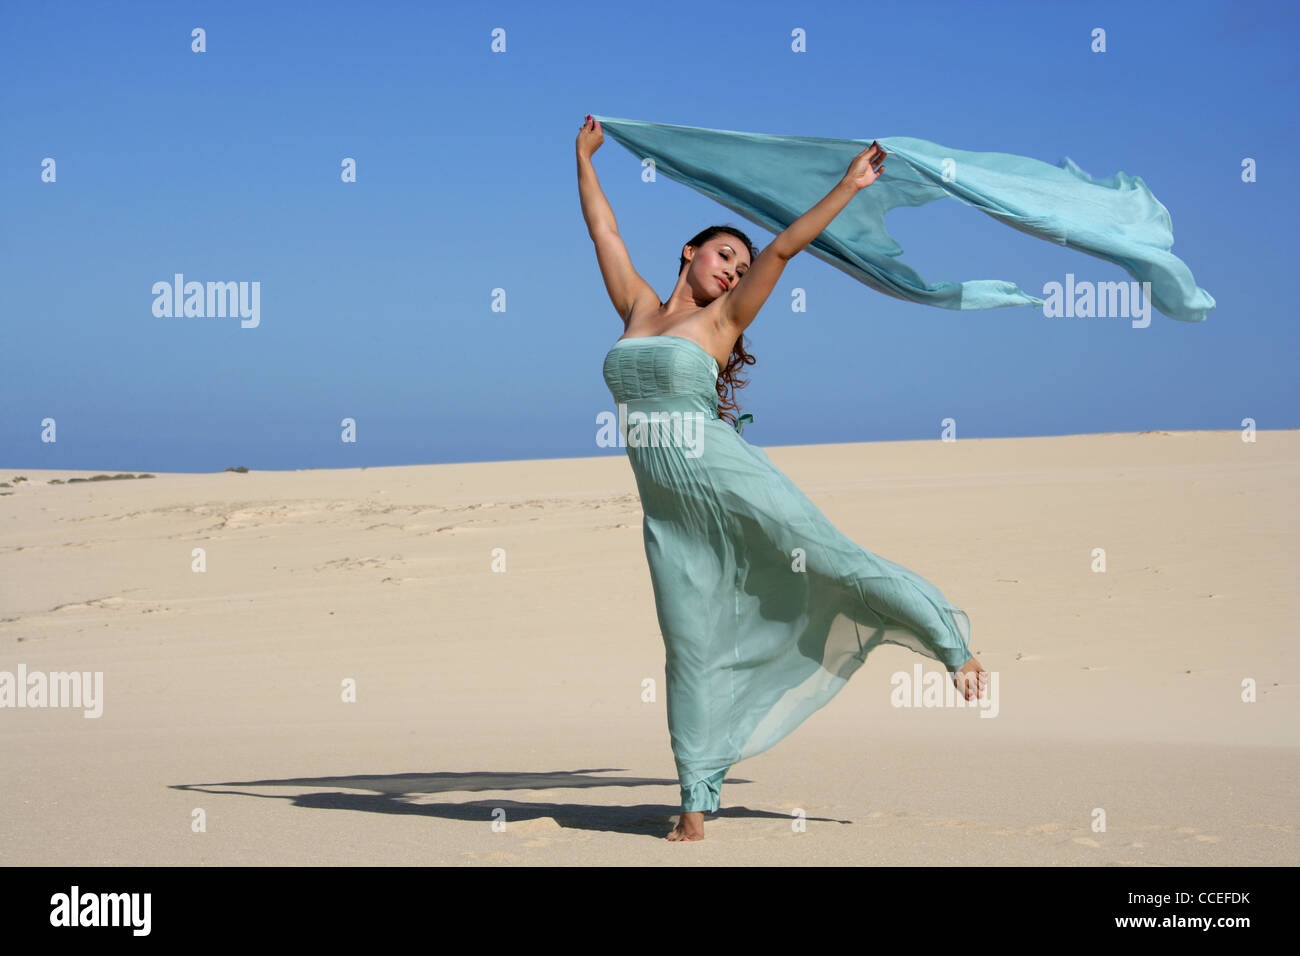 Indonesian Girl in a Turquoise Dress Posing on Sand Dunes, Fuerteventura, Canary Islands, Spain. Stock Photo